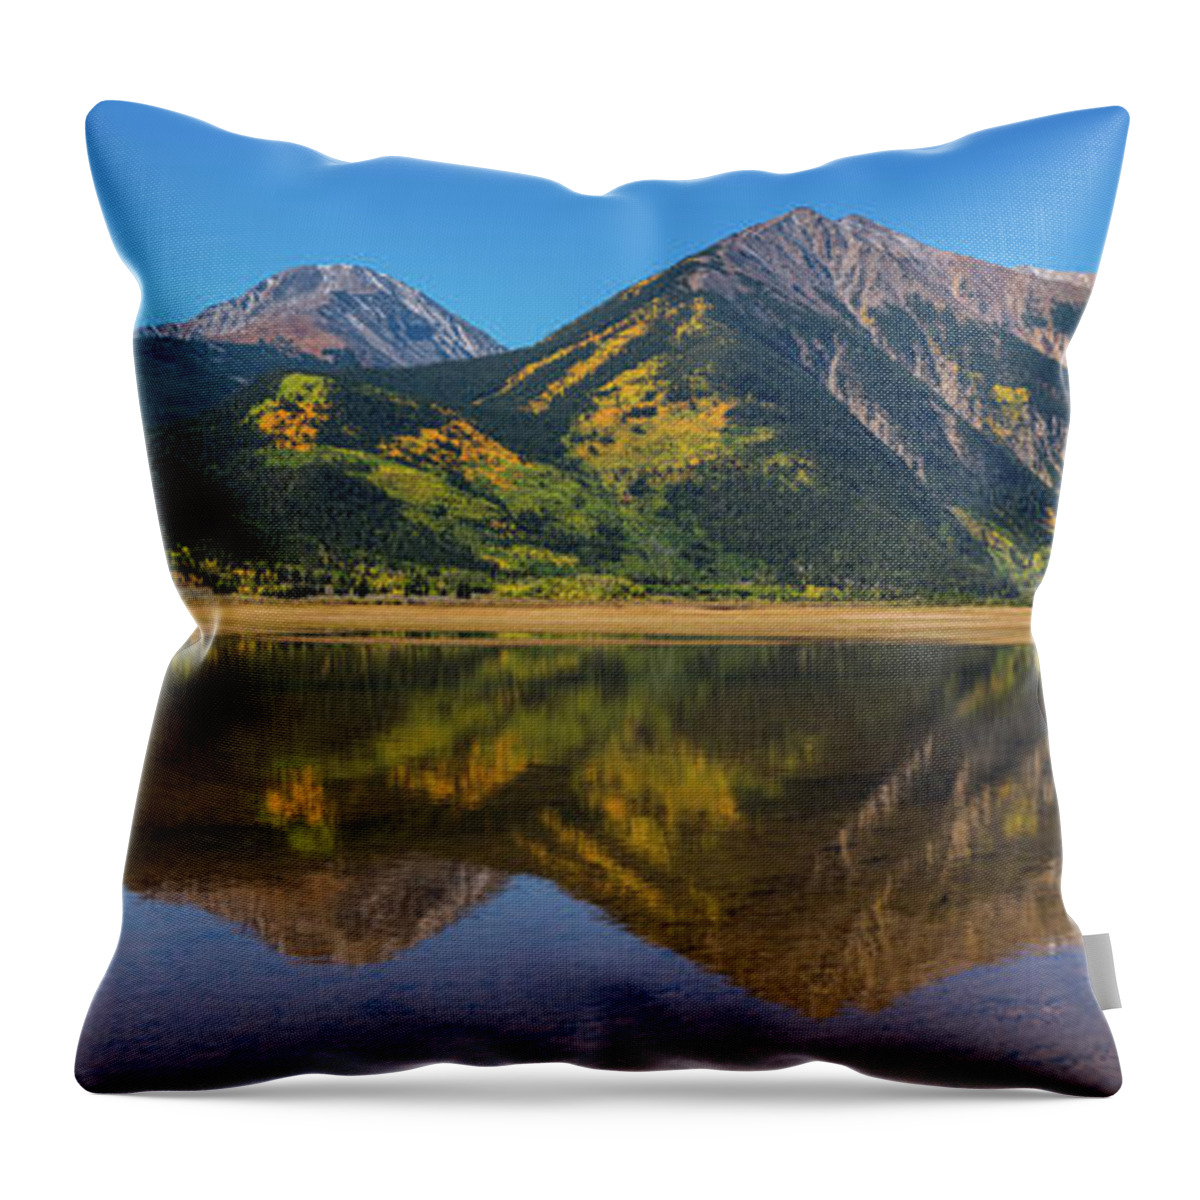  Throw Pillow featuring the photograph Twin Lakes Pano by Darren White